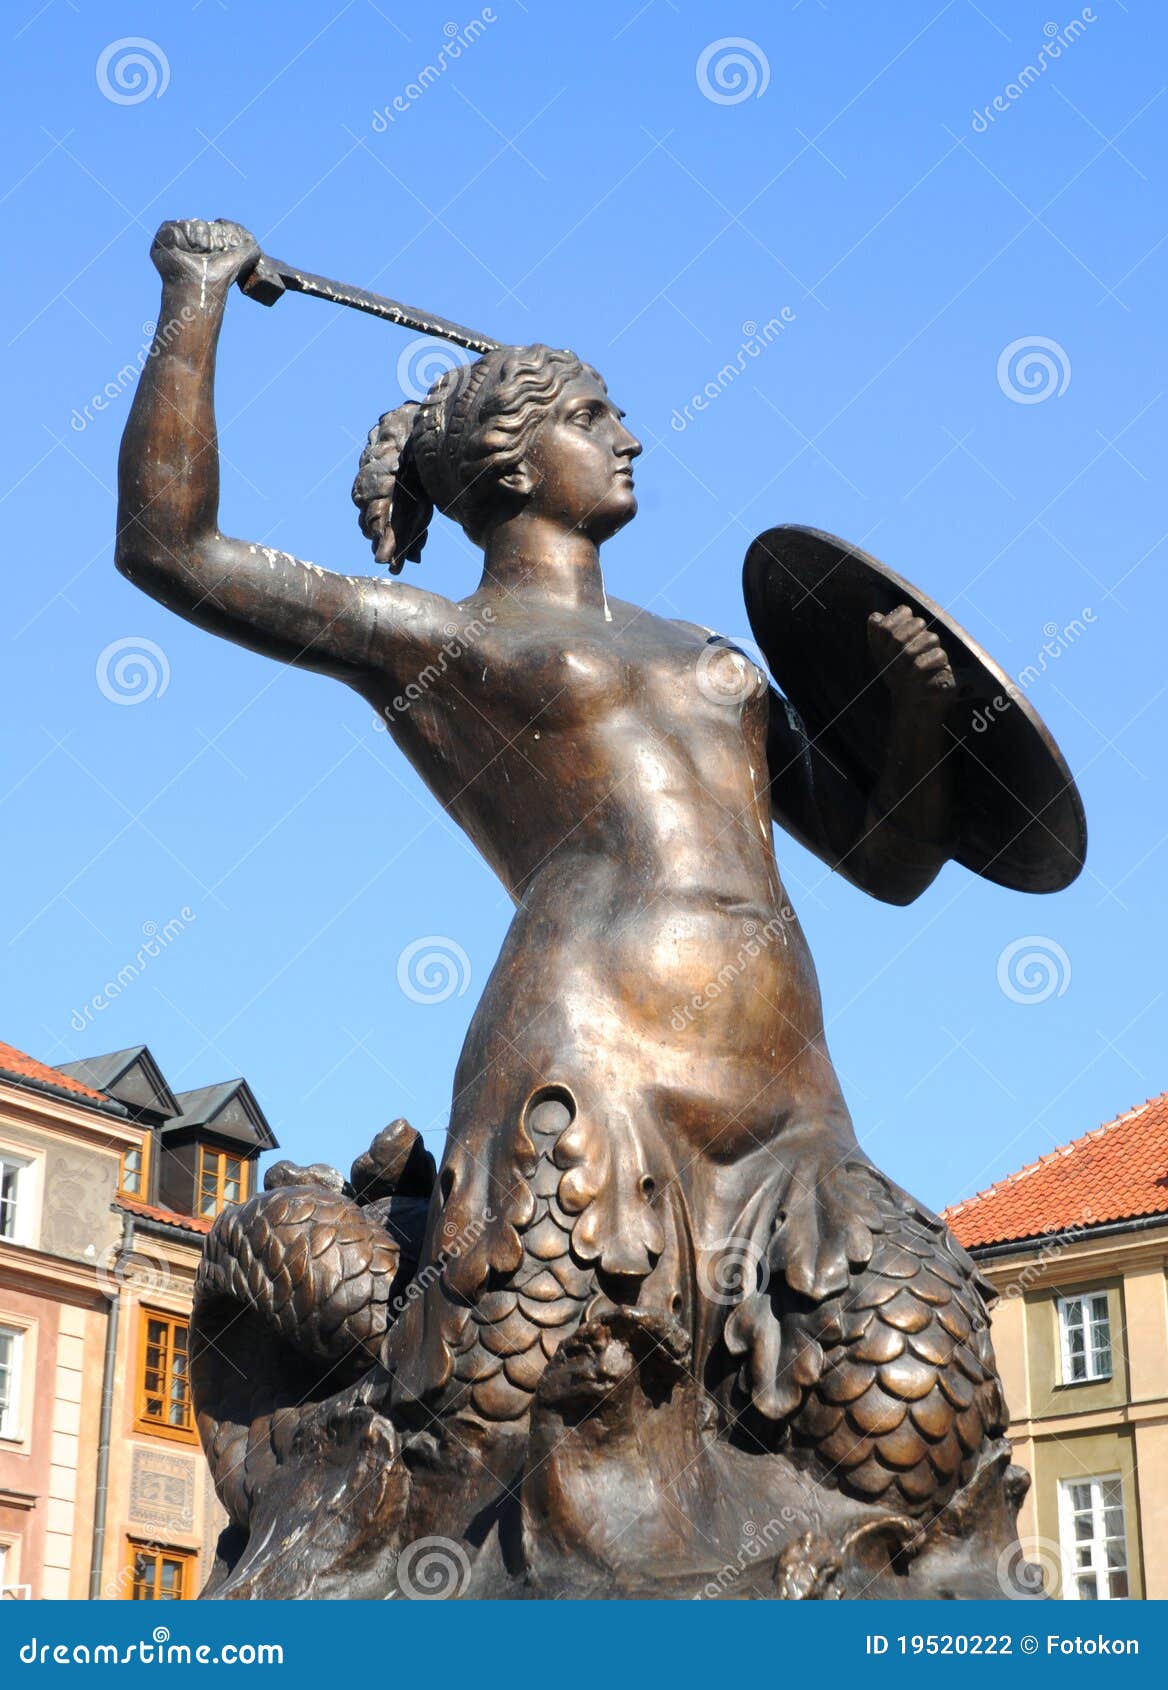 statue of mermaid, old town in warsaw, poland